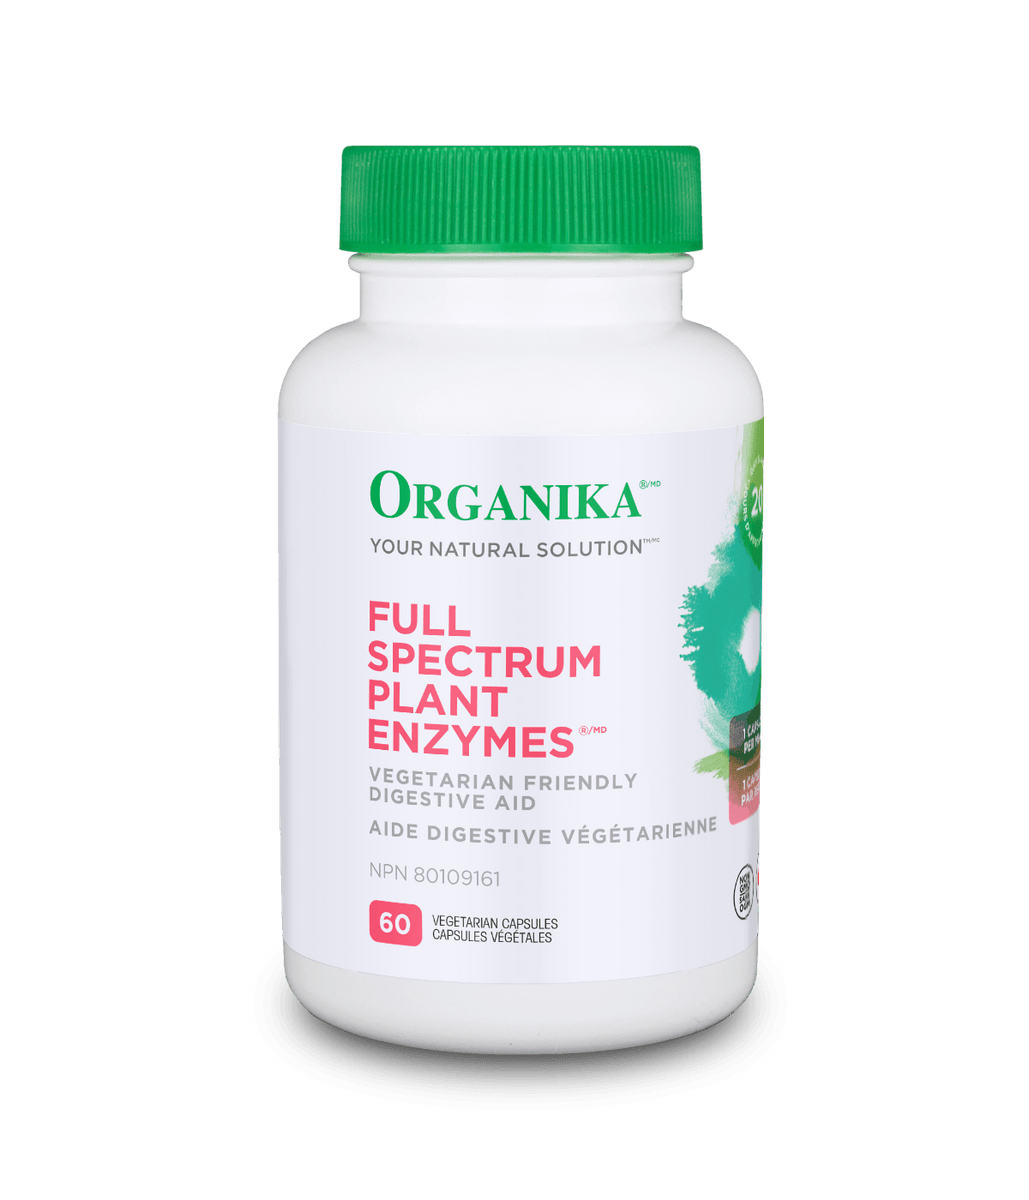 Plant-based enzymes